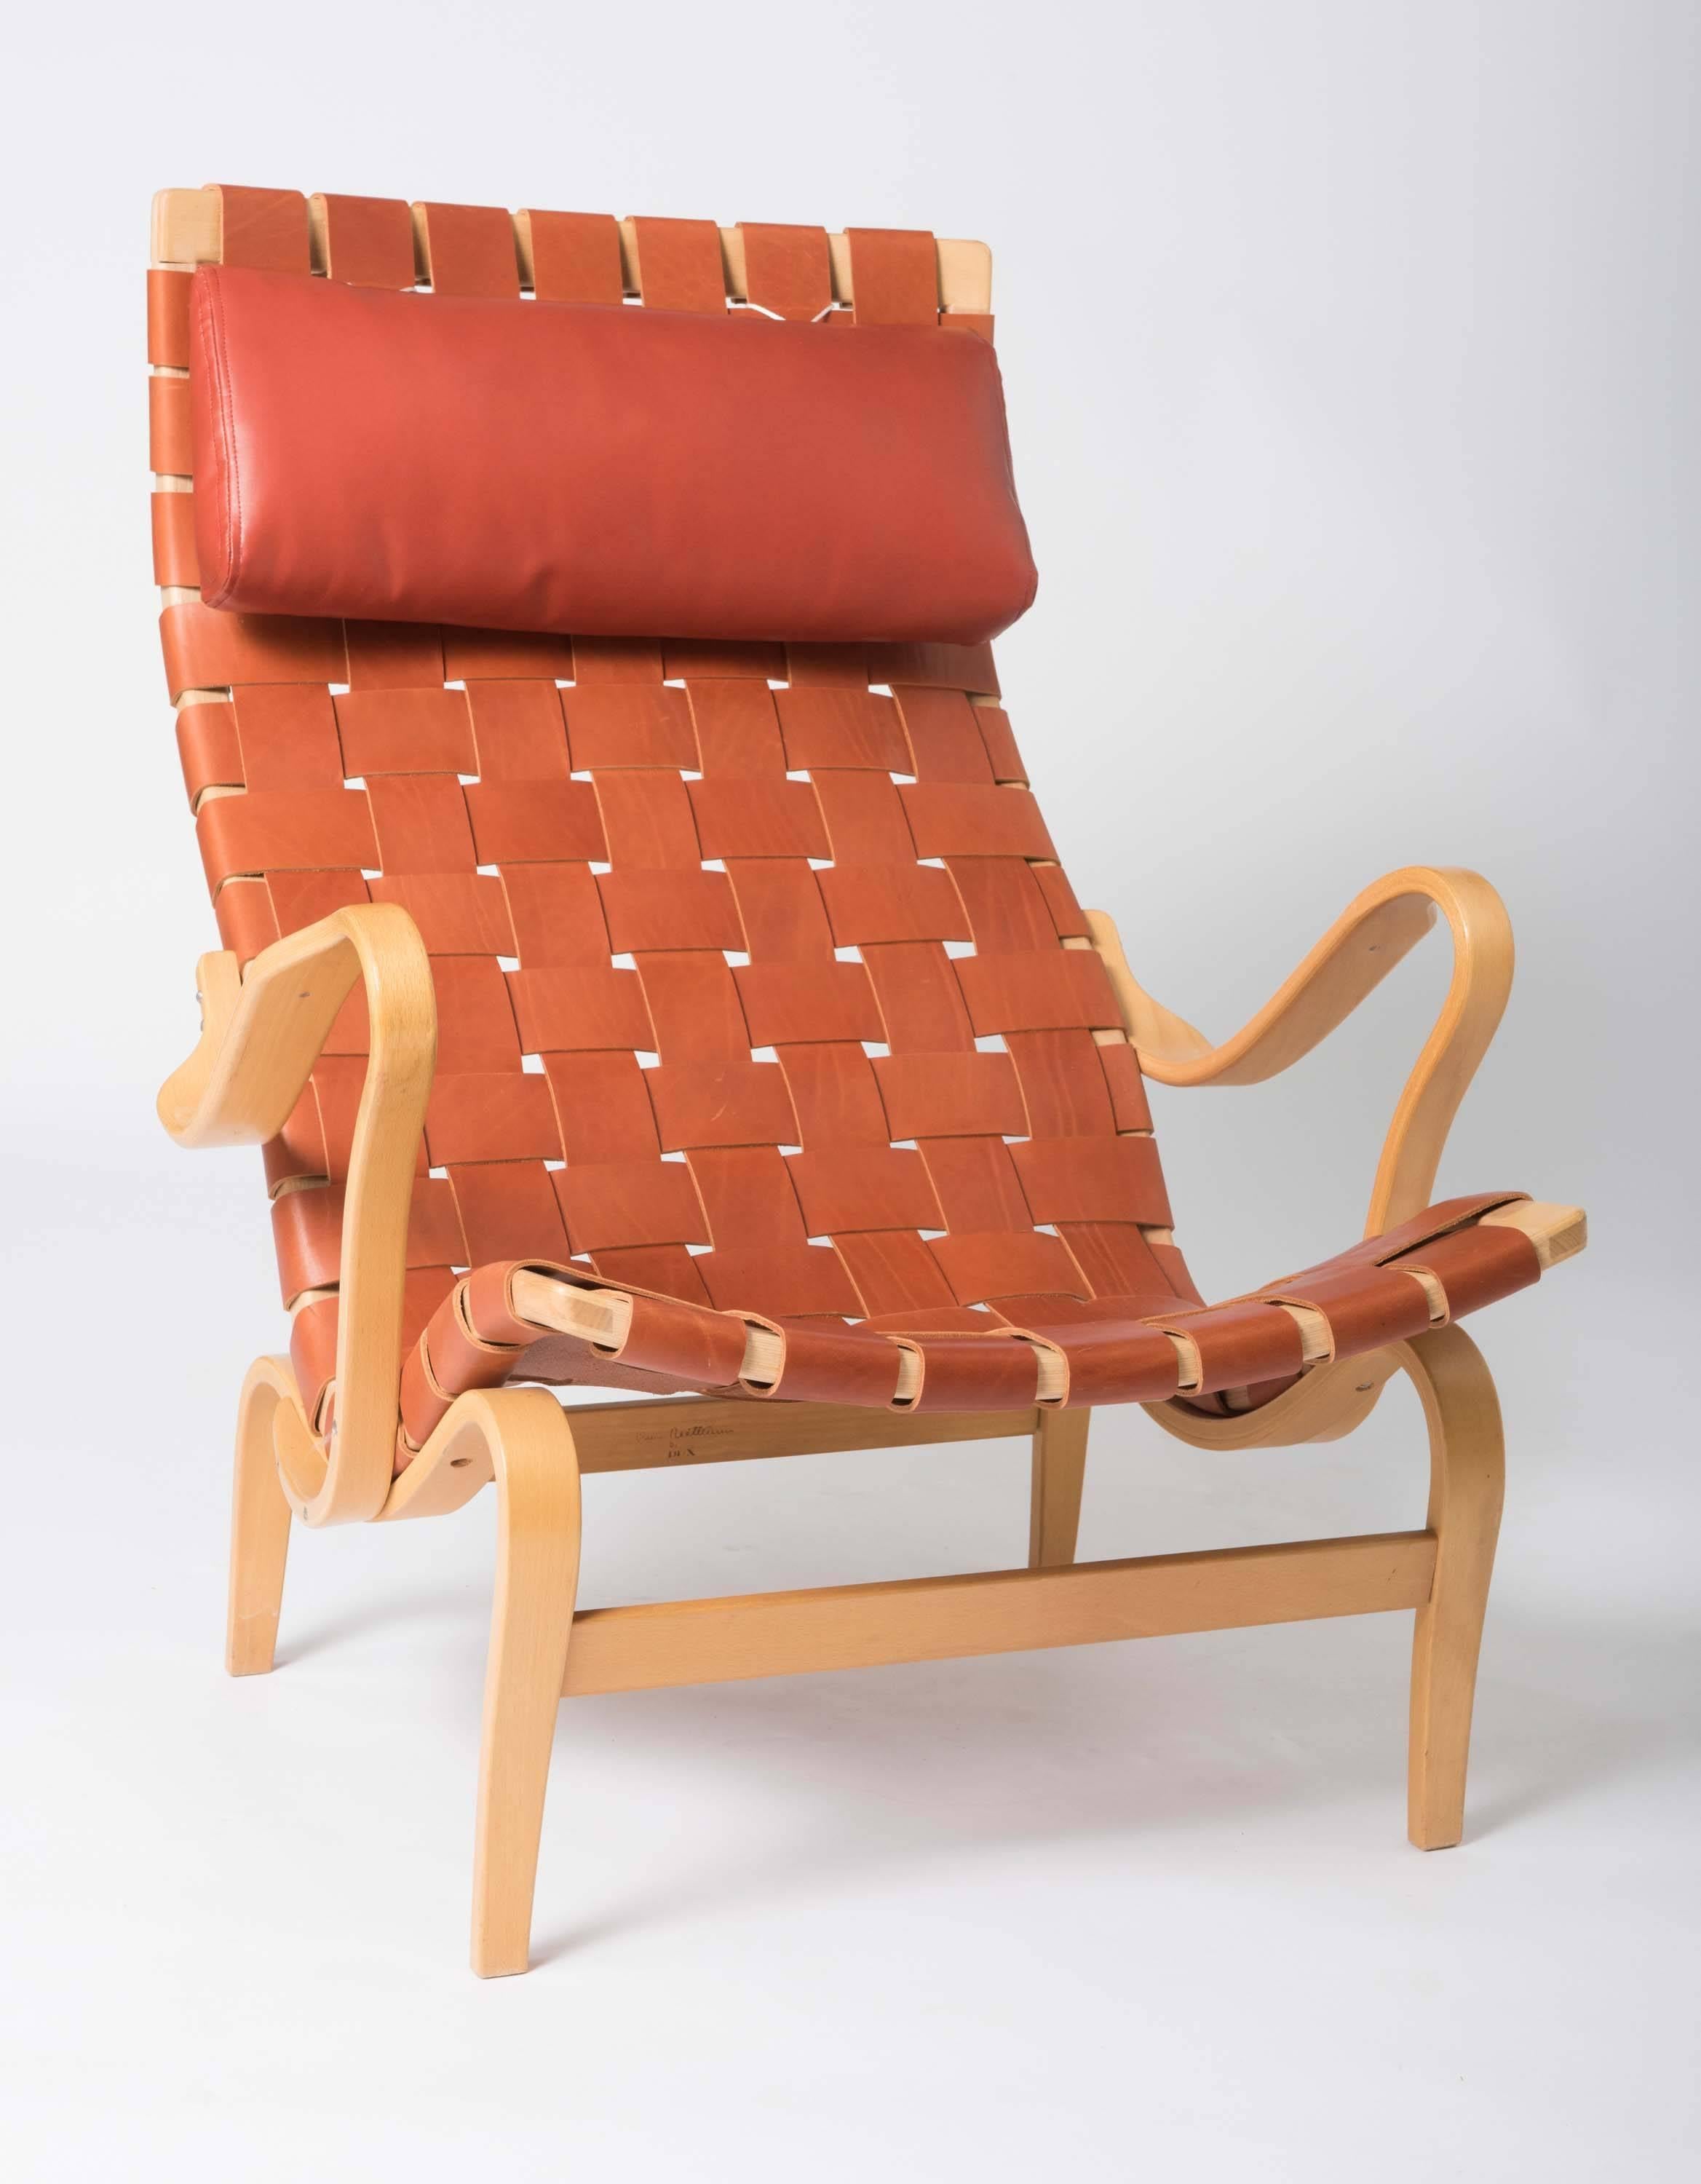 A pair of birch lounge chairs.
“Pernilla” by Bruno Mathsson.
For “DUX”, Trelleborg.
Fabric of cushion renewed,
Sweden, circa 1950.
Stamped: Bruno Mathsson by DUX.
Measures: 97 cm high x 76.5 cm wide x 91 cm deep.
 